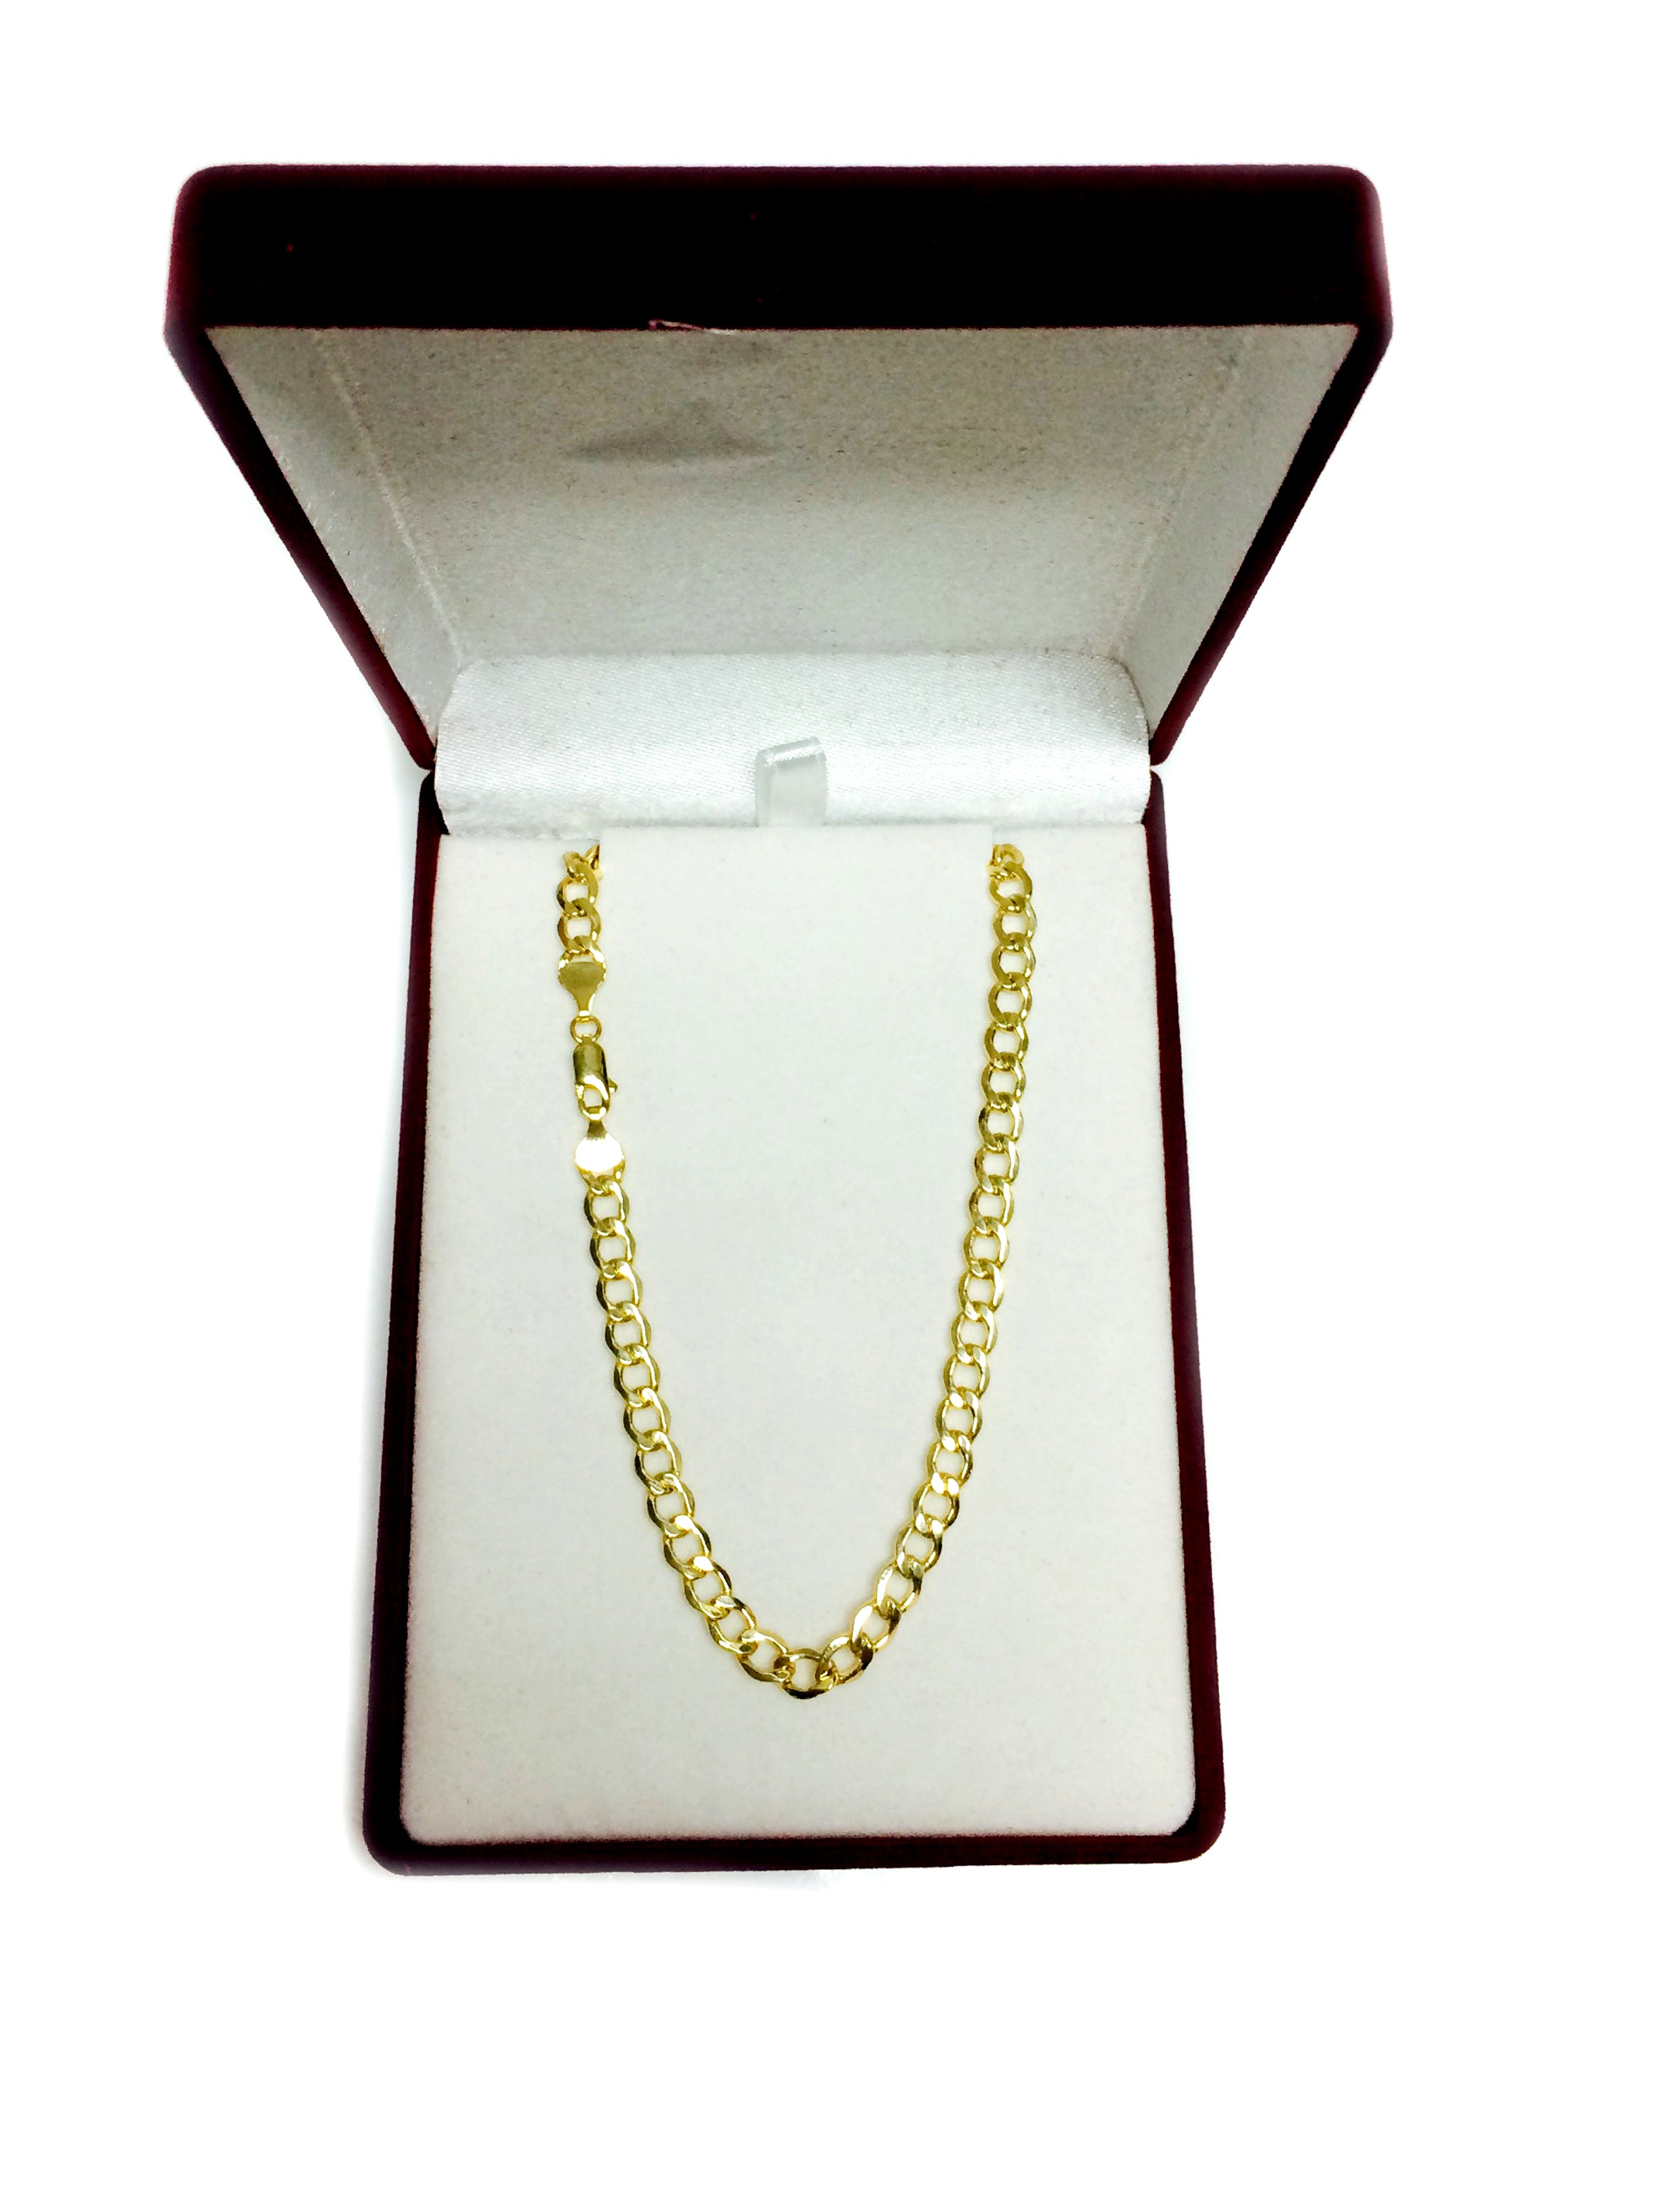 10k Yellow Gold Curb Hollow Chain Necklace, 5.3mm